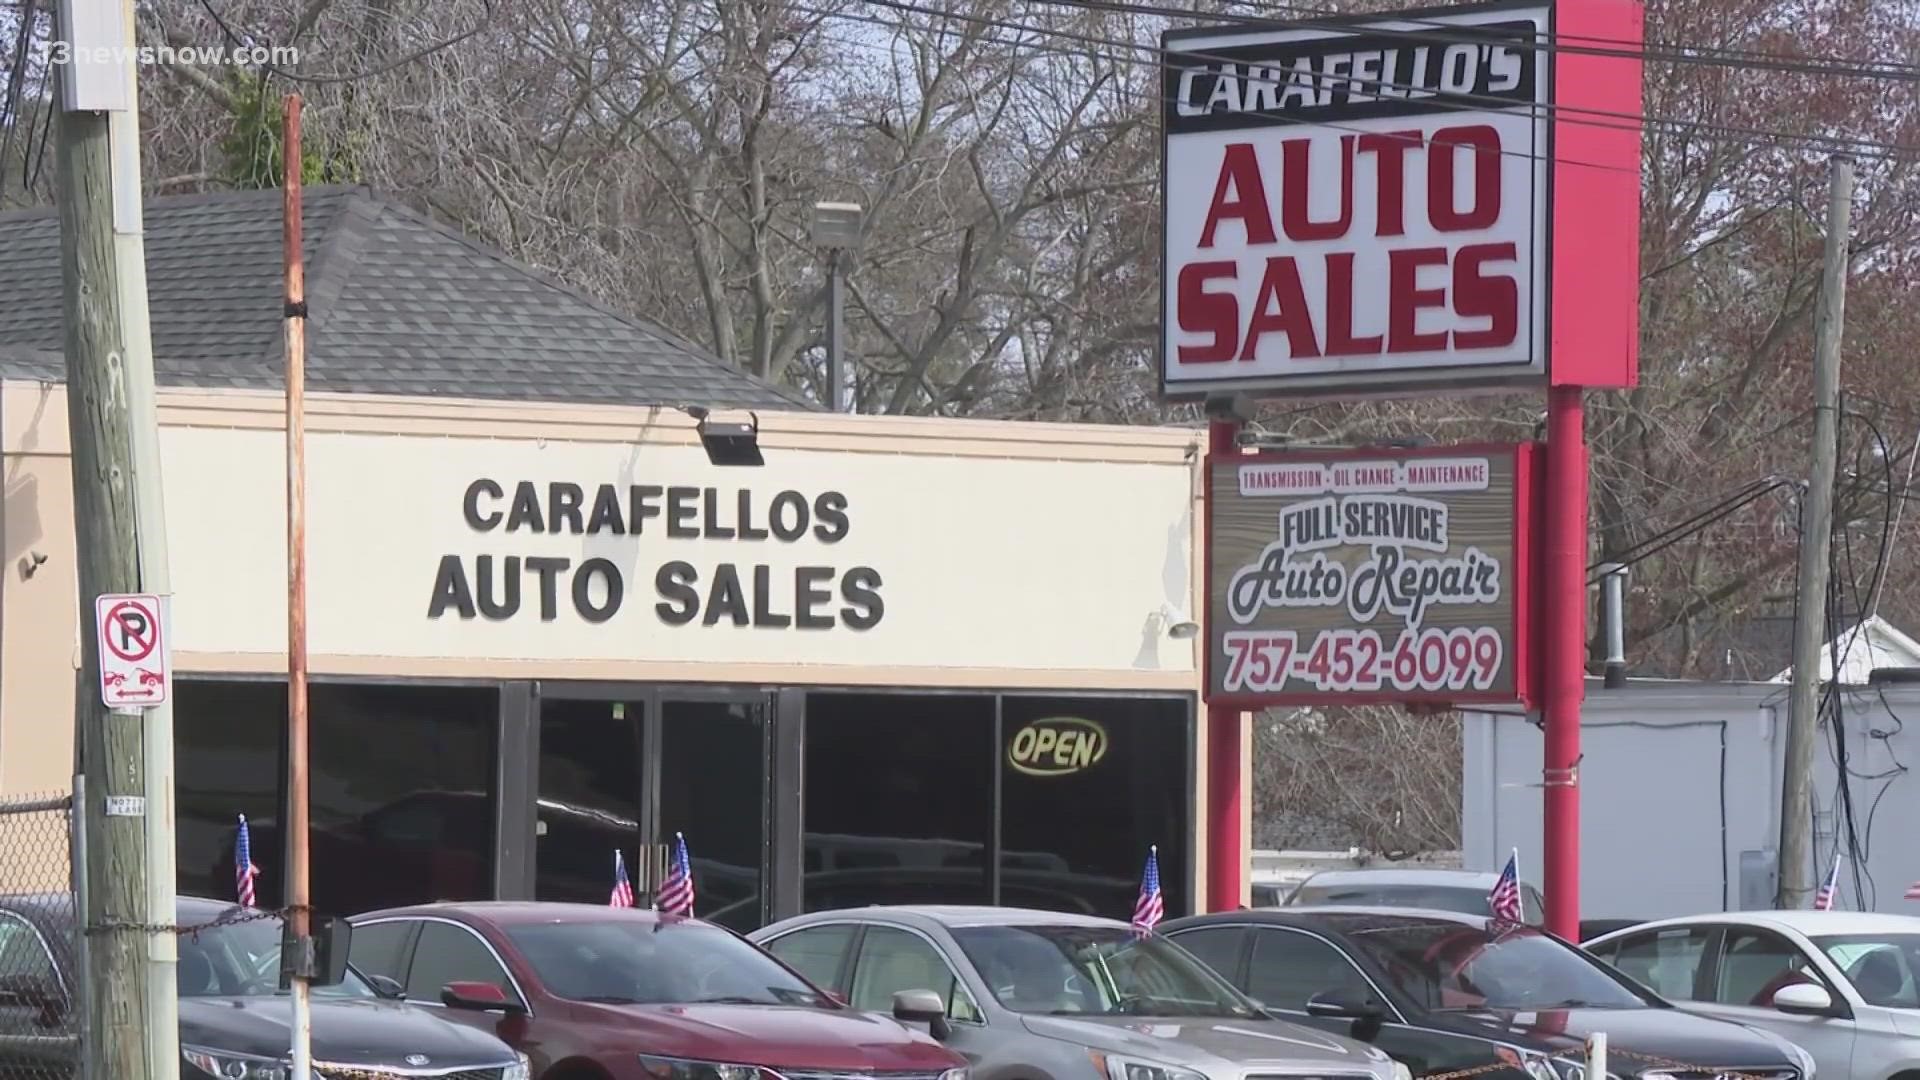 Carafello's Auto Sales had previously been on the same "off-limits" list back in 2015 for the same reason.